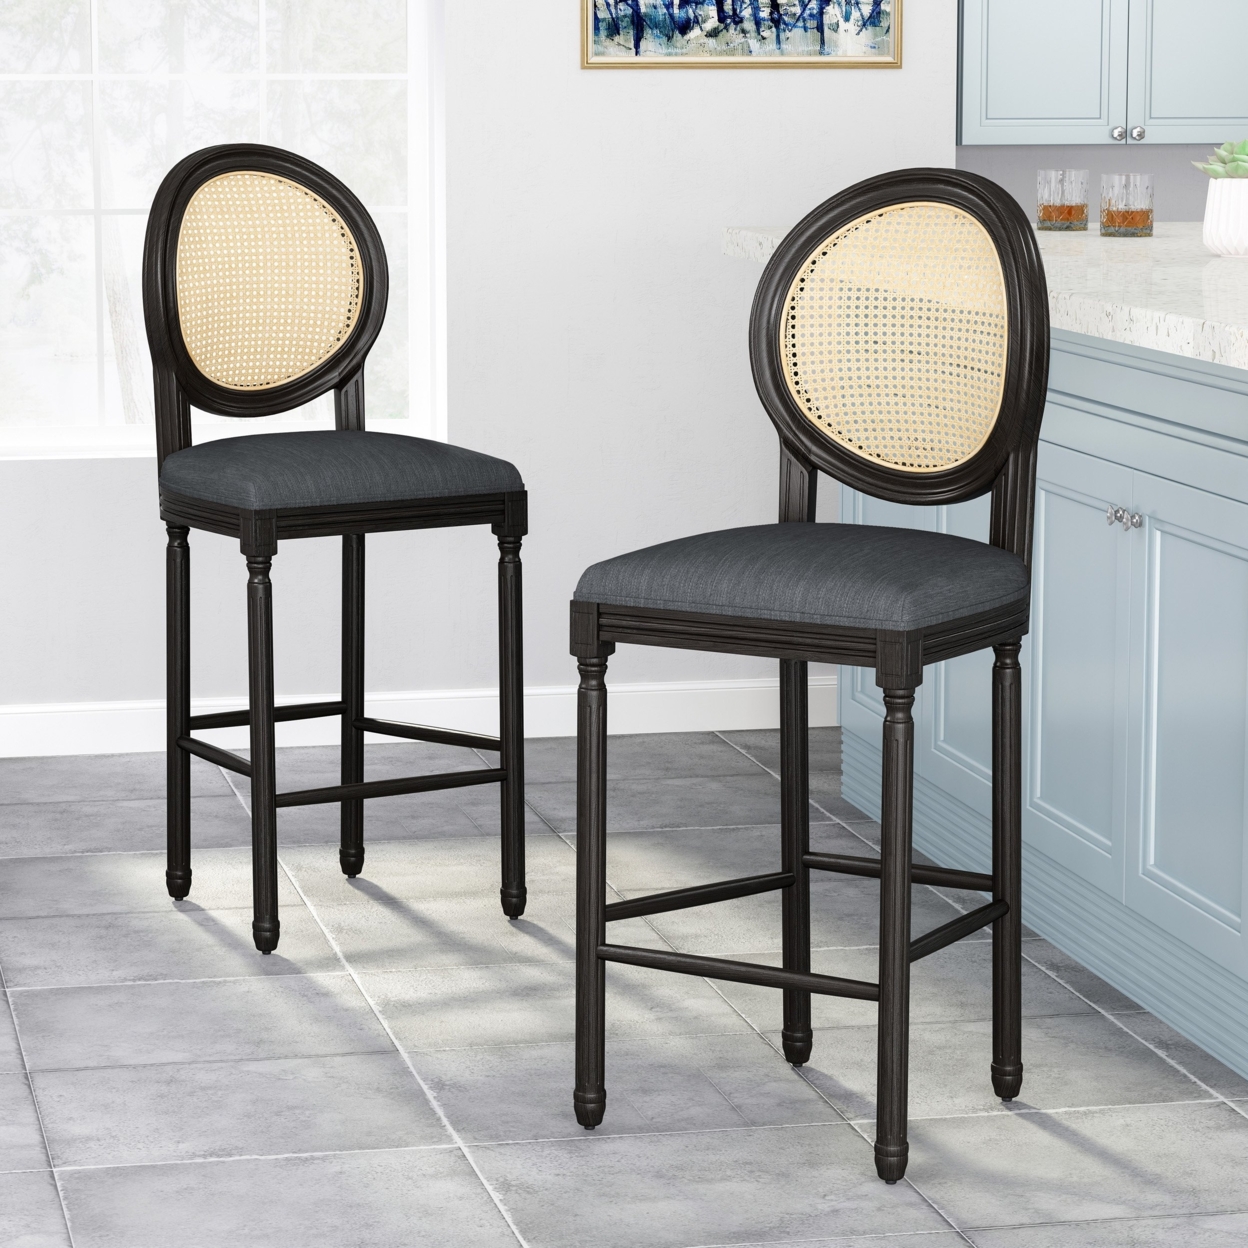 Towner French Country Wooden Barstools With Upholstered Seating (Set Of 2) - Black/beige/natural